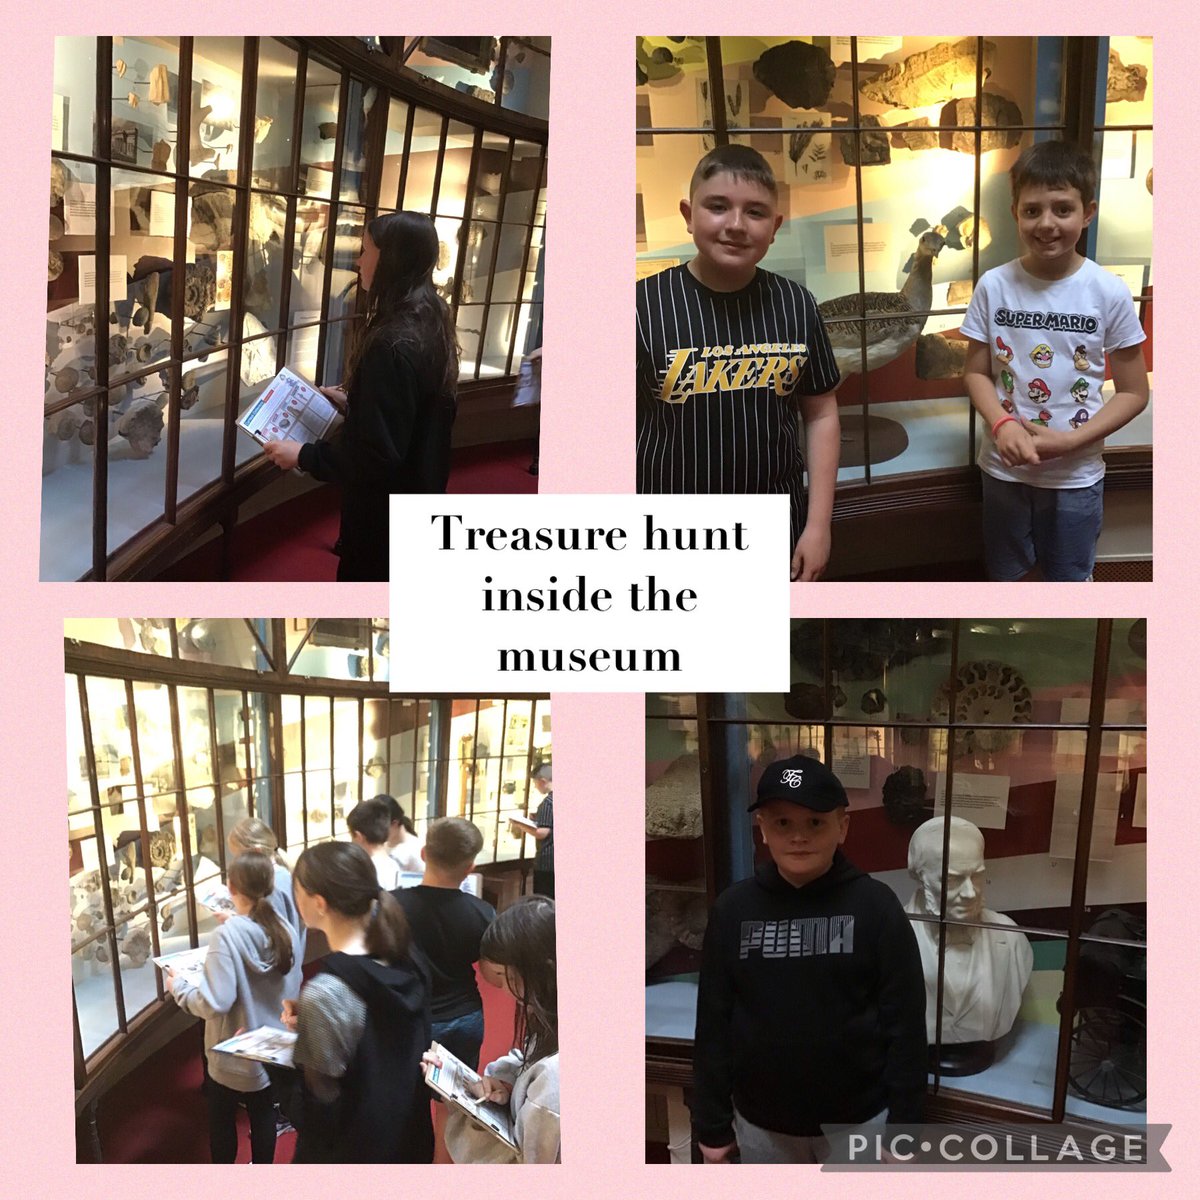 Team Humber are exploring the Rotunda Museum this morning … they have even taken part in treasure hunt 🧐 @BandBschool